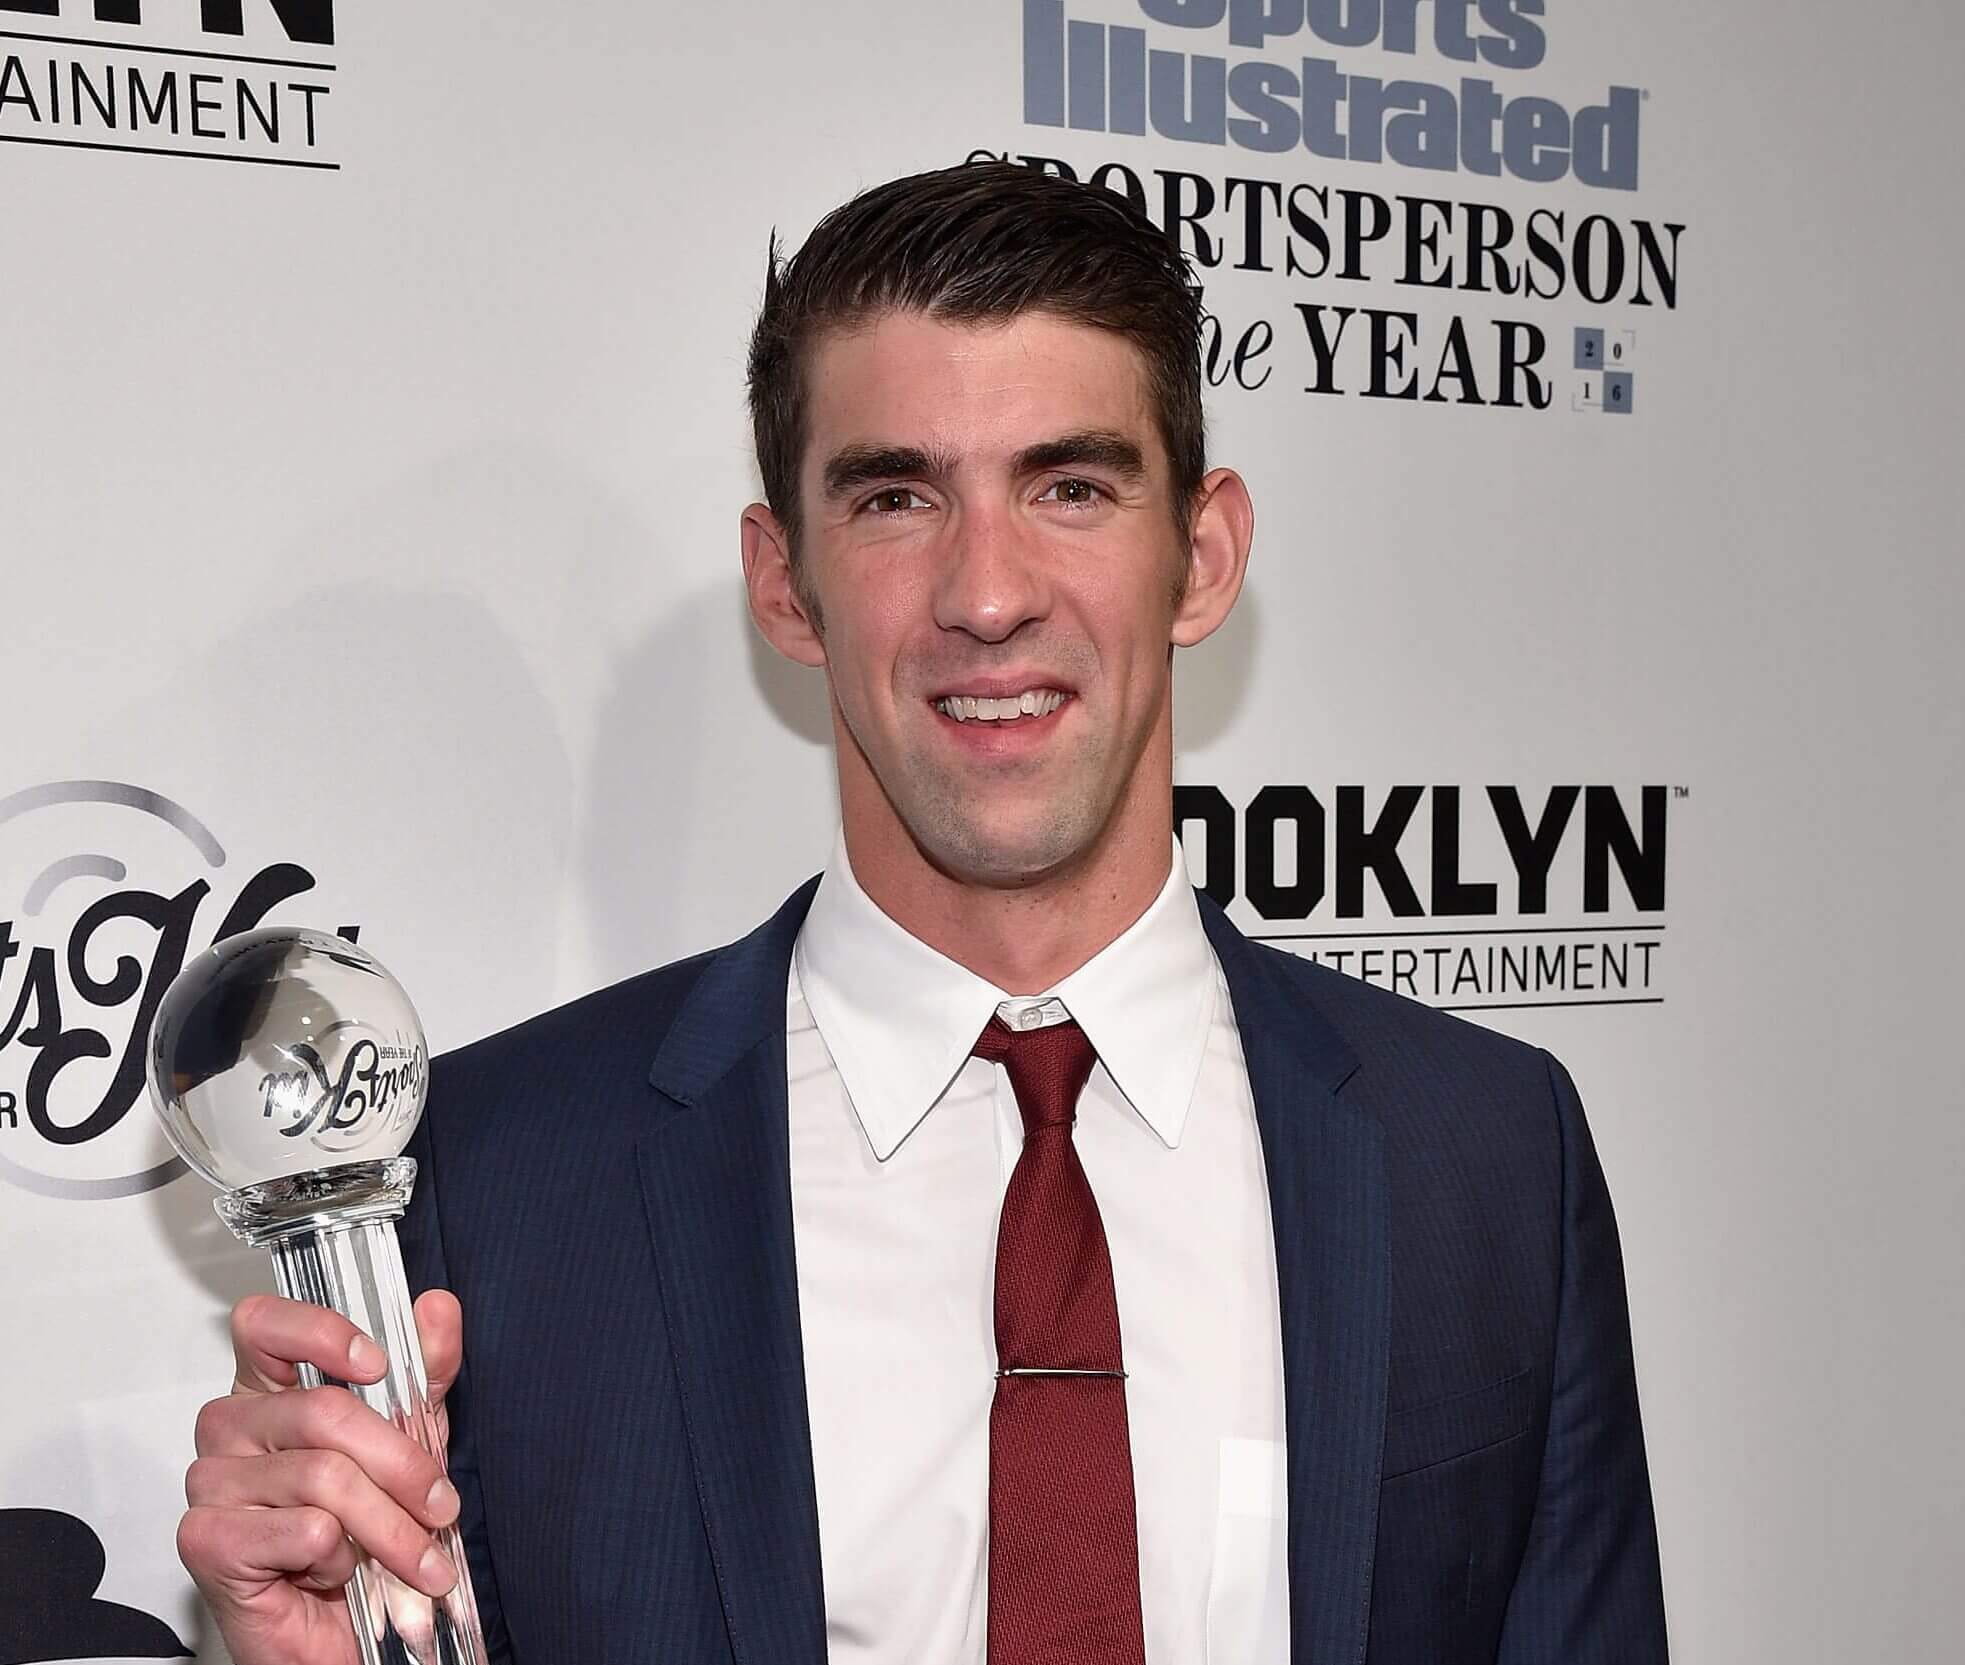 Michael Phelps Honored as Greatest Olympian of All Time by Sports